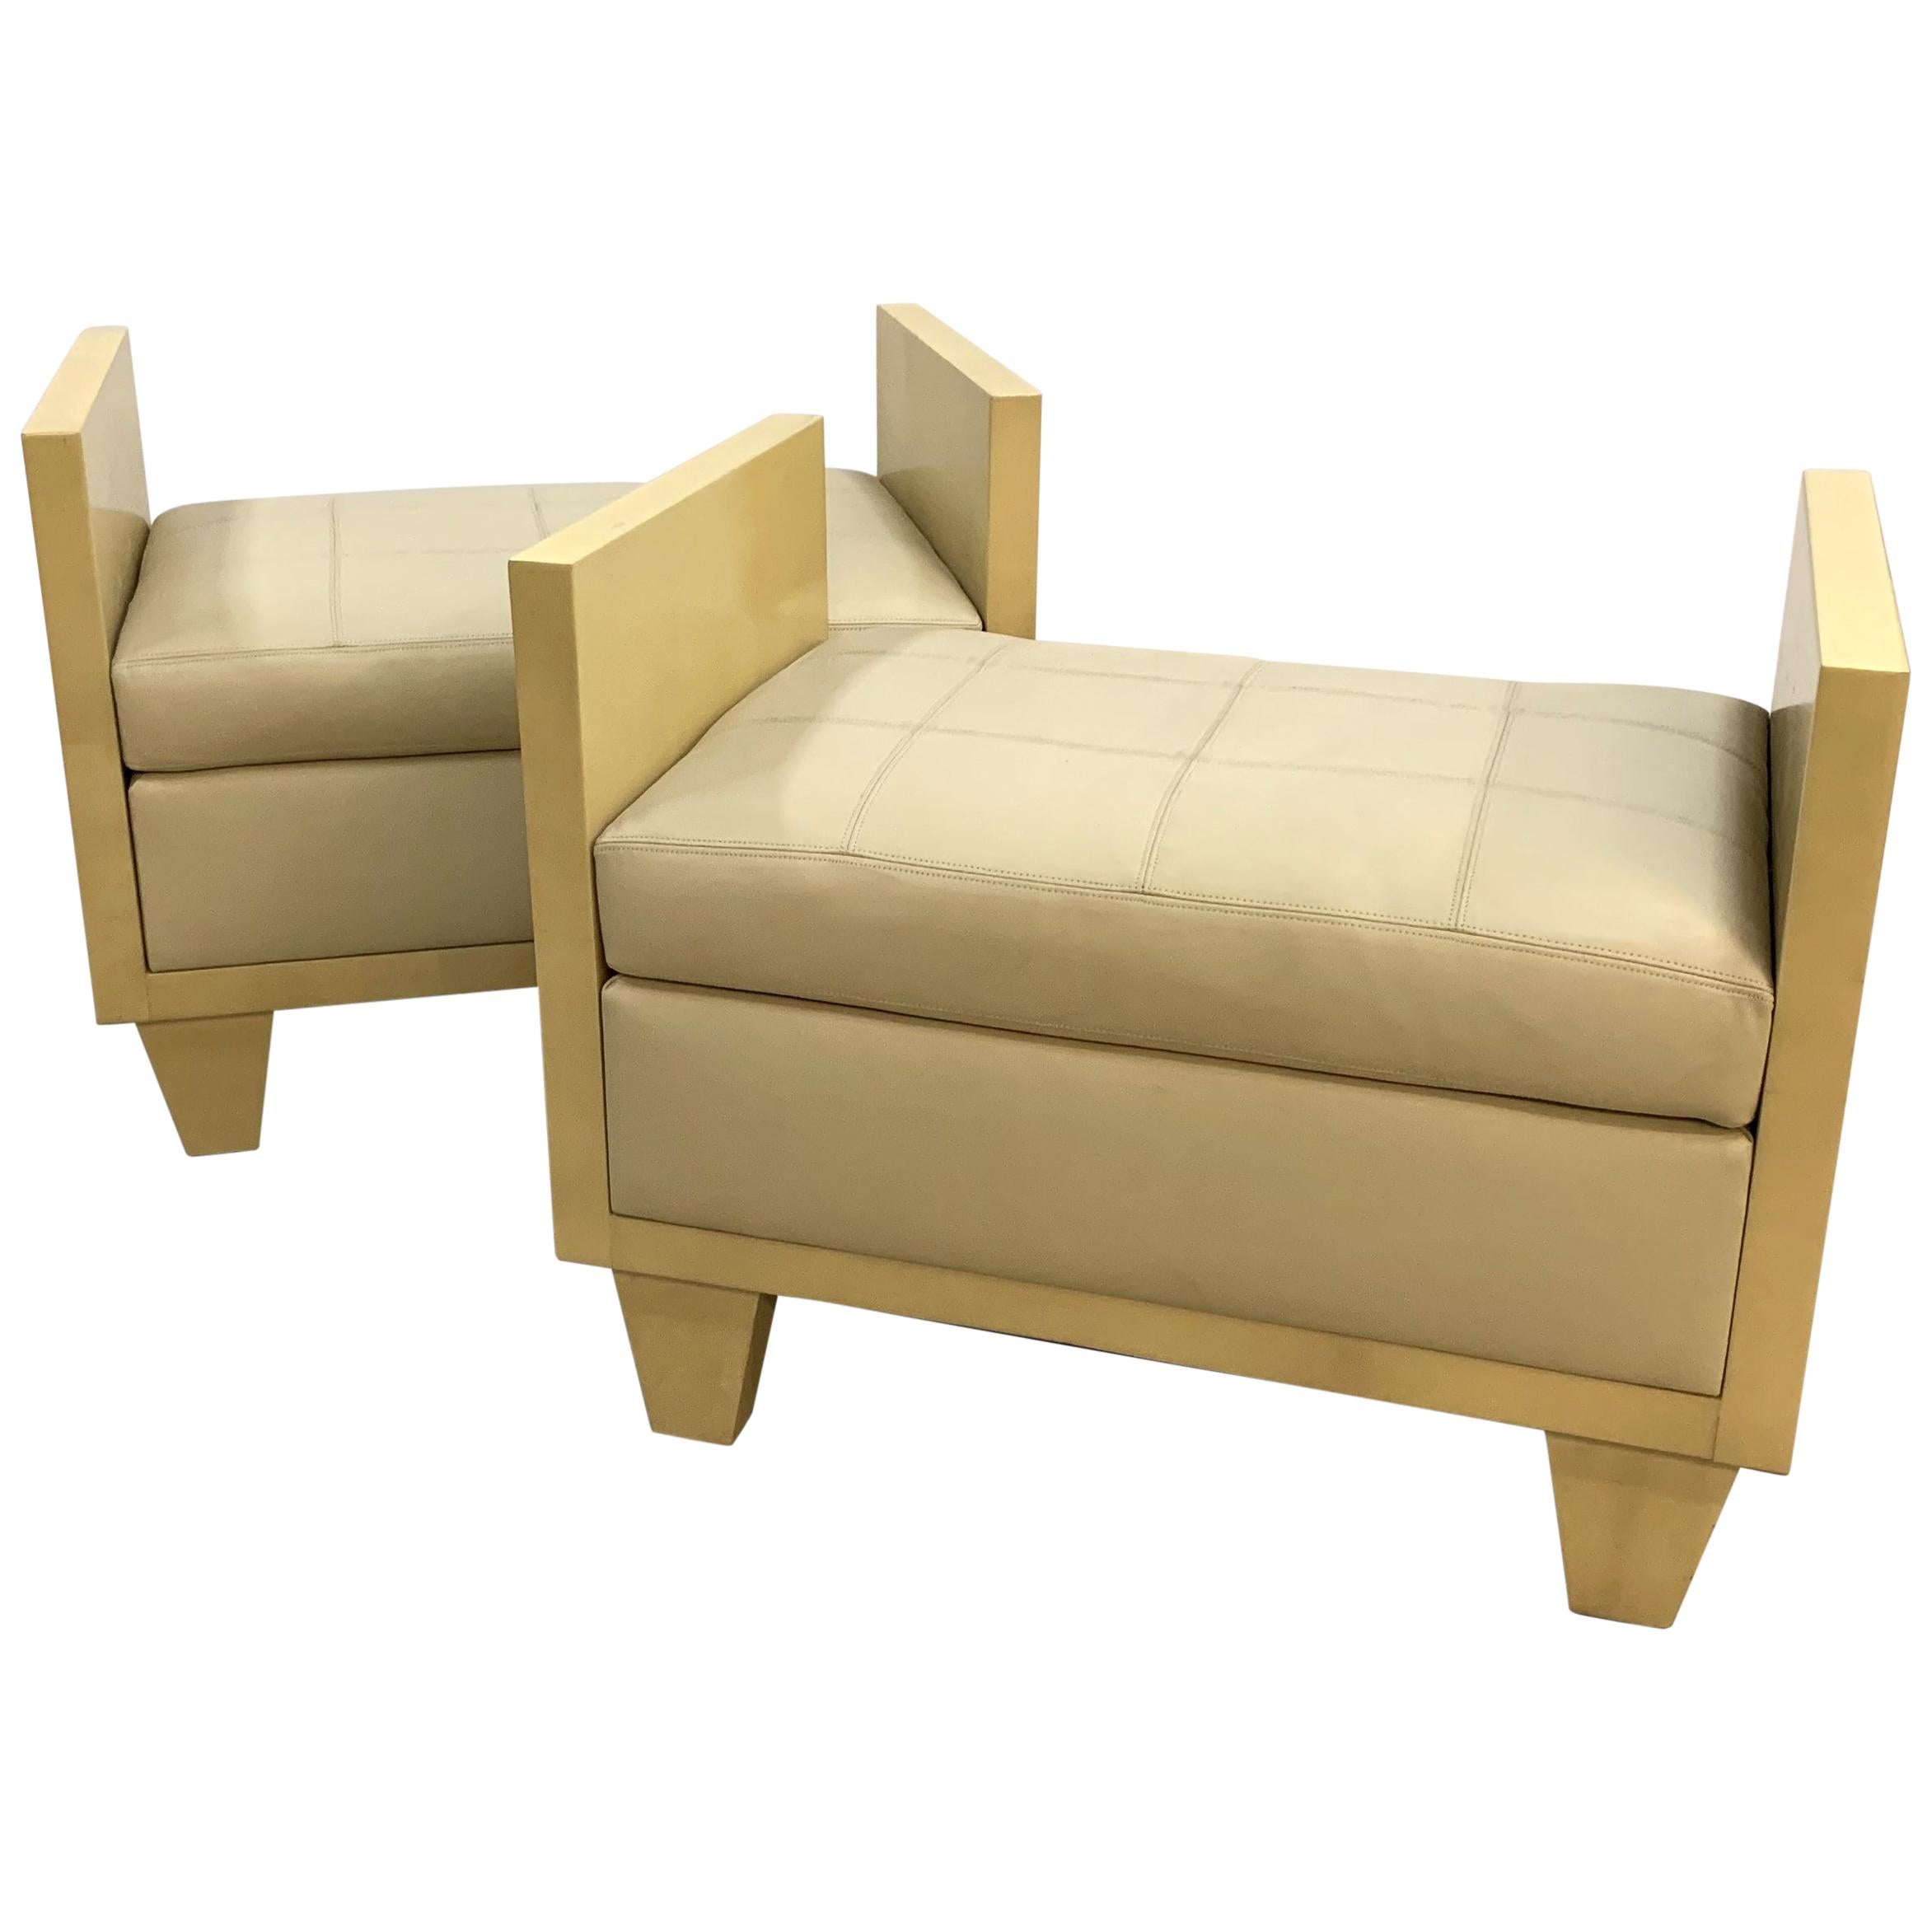 Wonderful Mid-Century Modern Pair of Natural Goat Skin Leather Benches/Stools For Sale